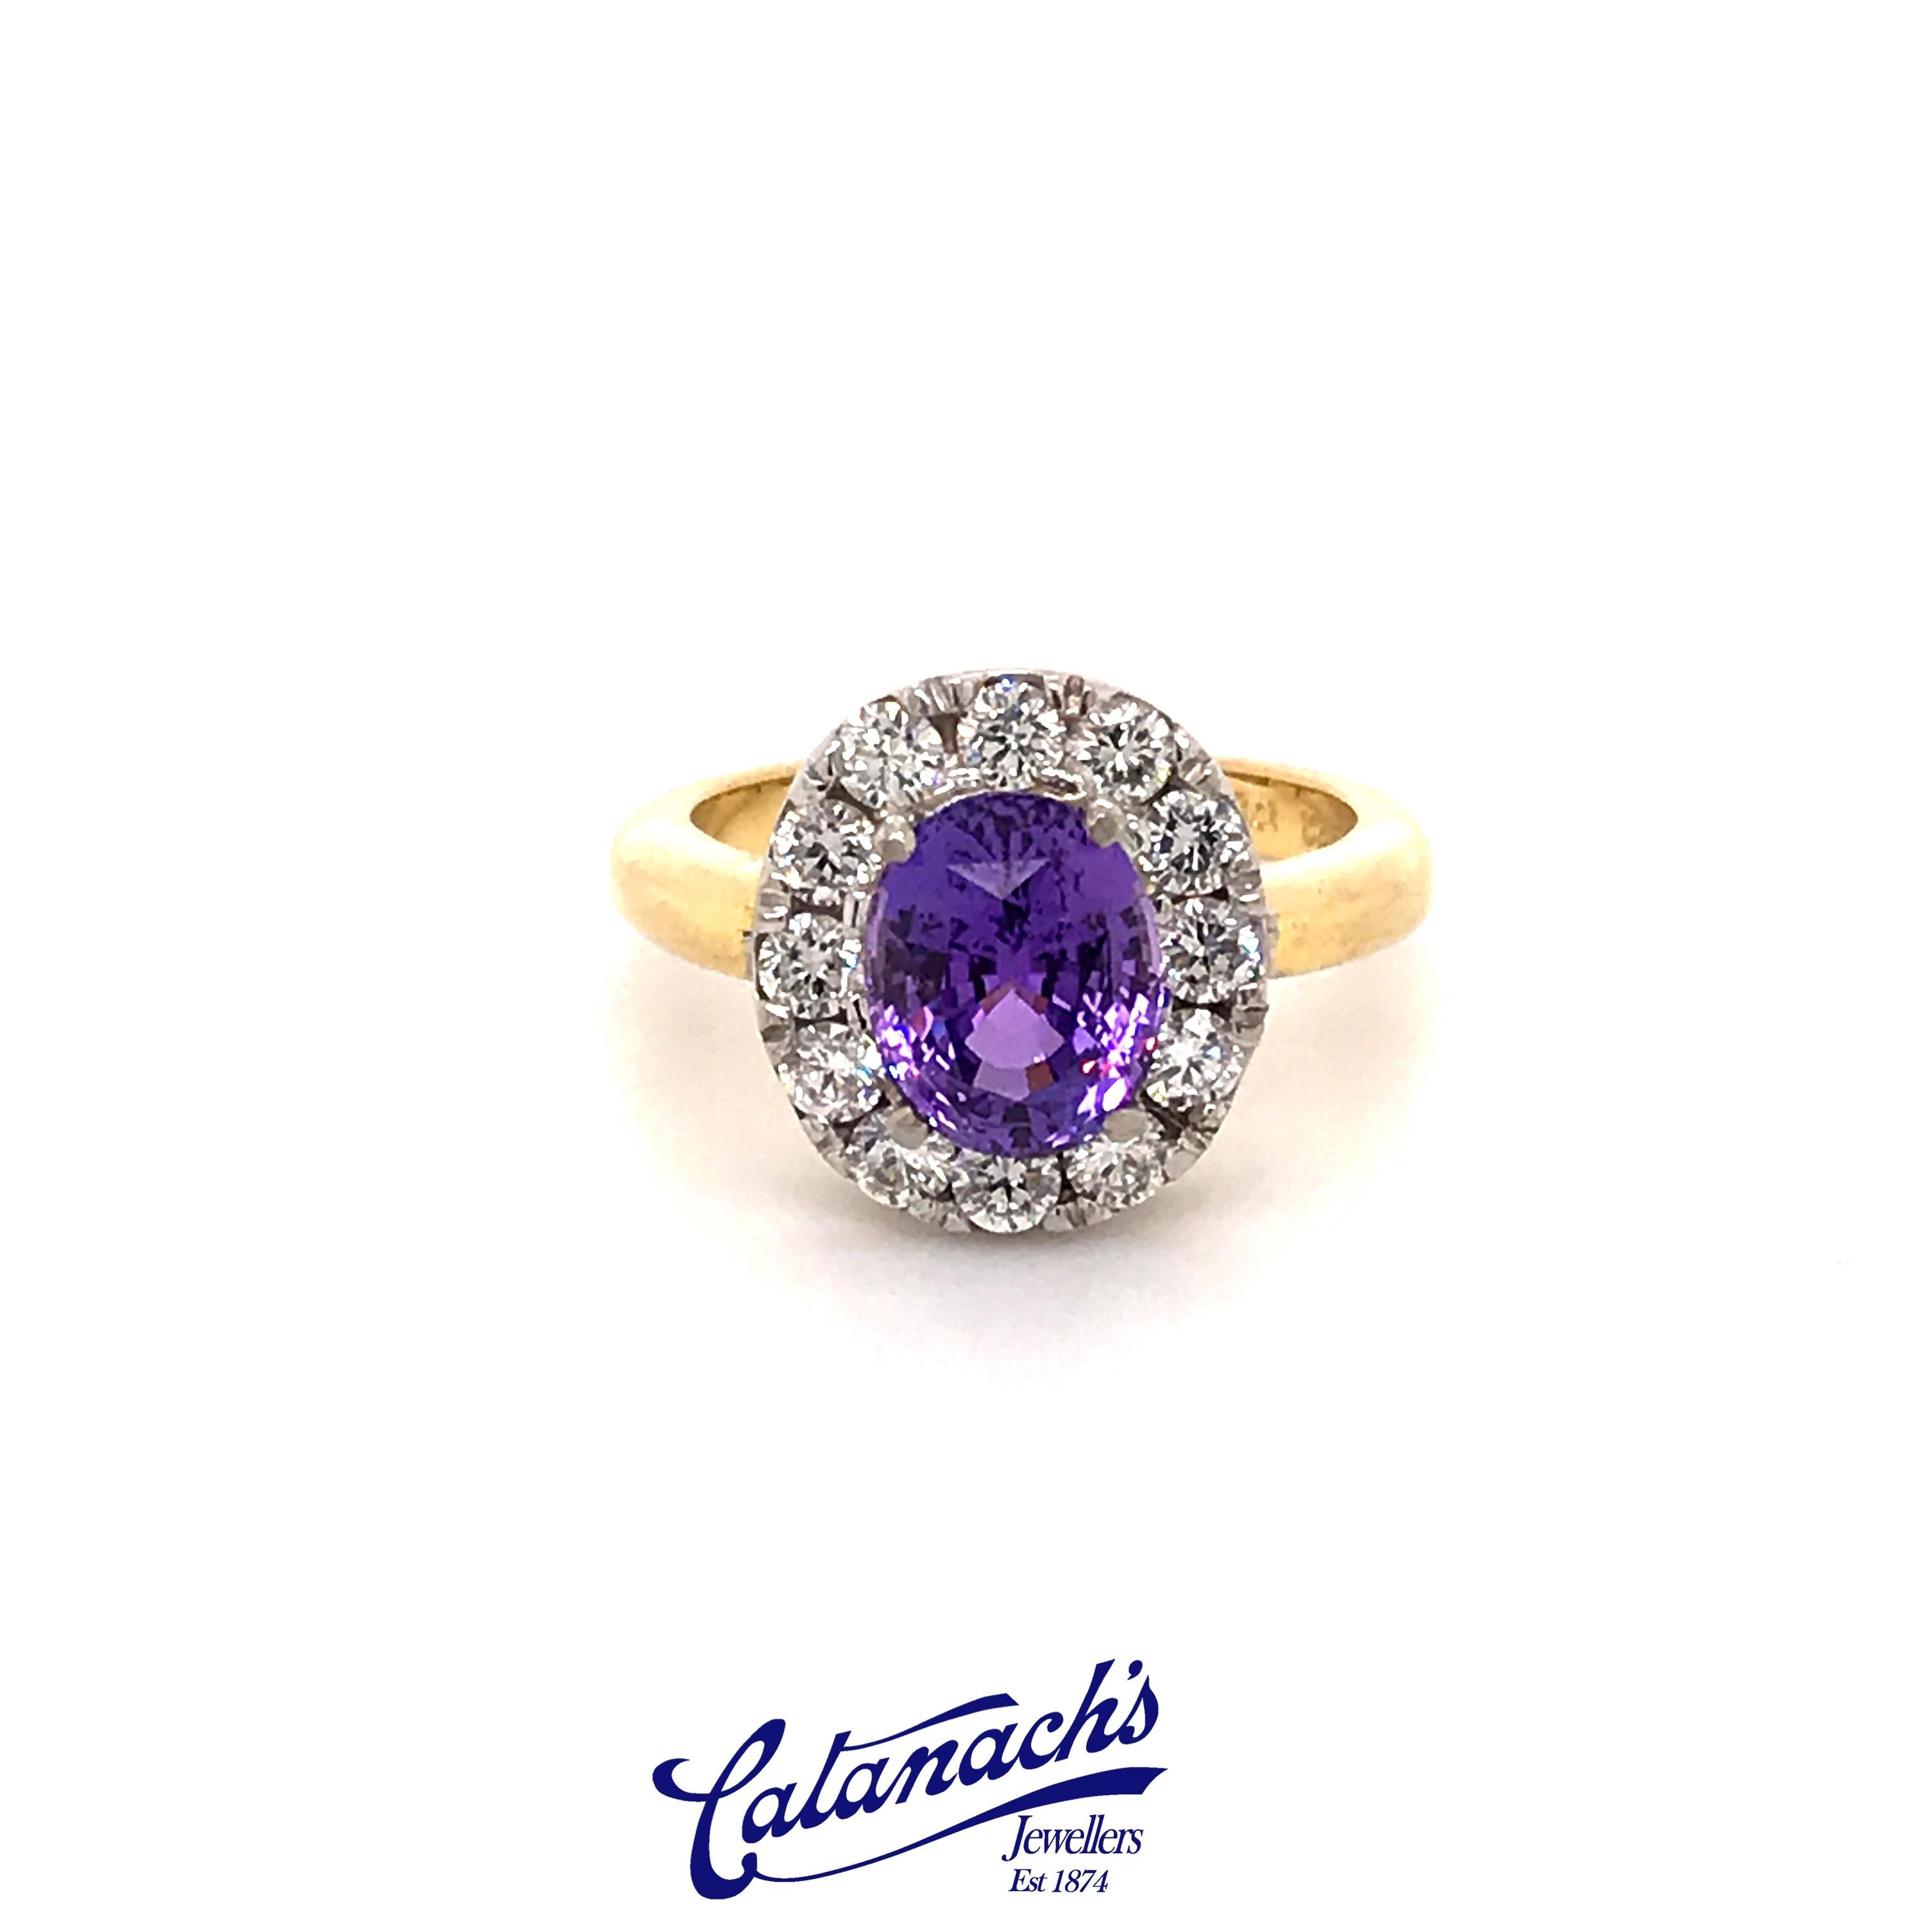 Lovely bright oval faceted purple ceylon sapphire and diamond cluster ring in 18ct yellow and white gold, 
- purple oval sapphire 2.80ct - 8.86mm x 7.04mm 
- 12 round brilliant diamonds totalling 0.72ct GSI
Ring is size M and can be resized 